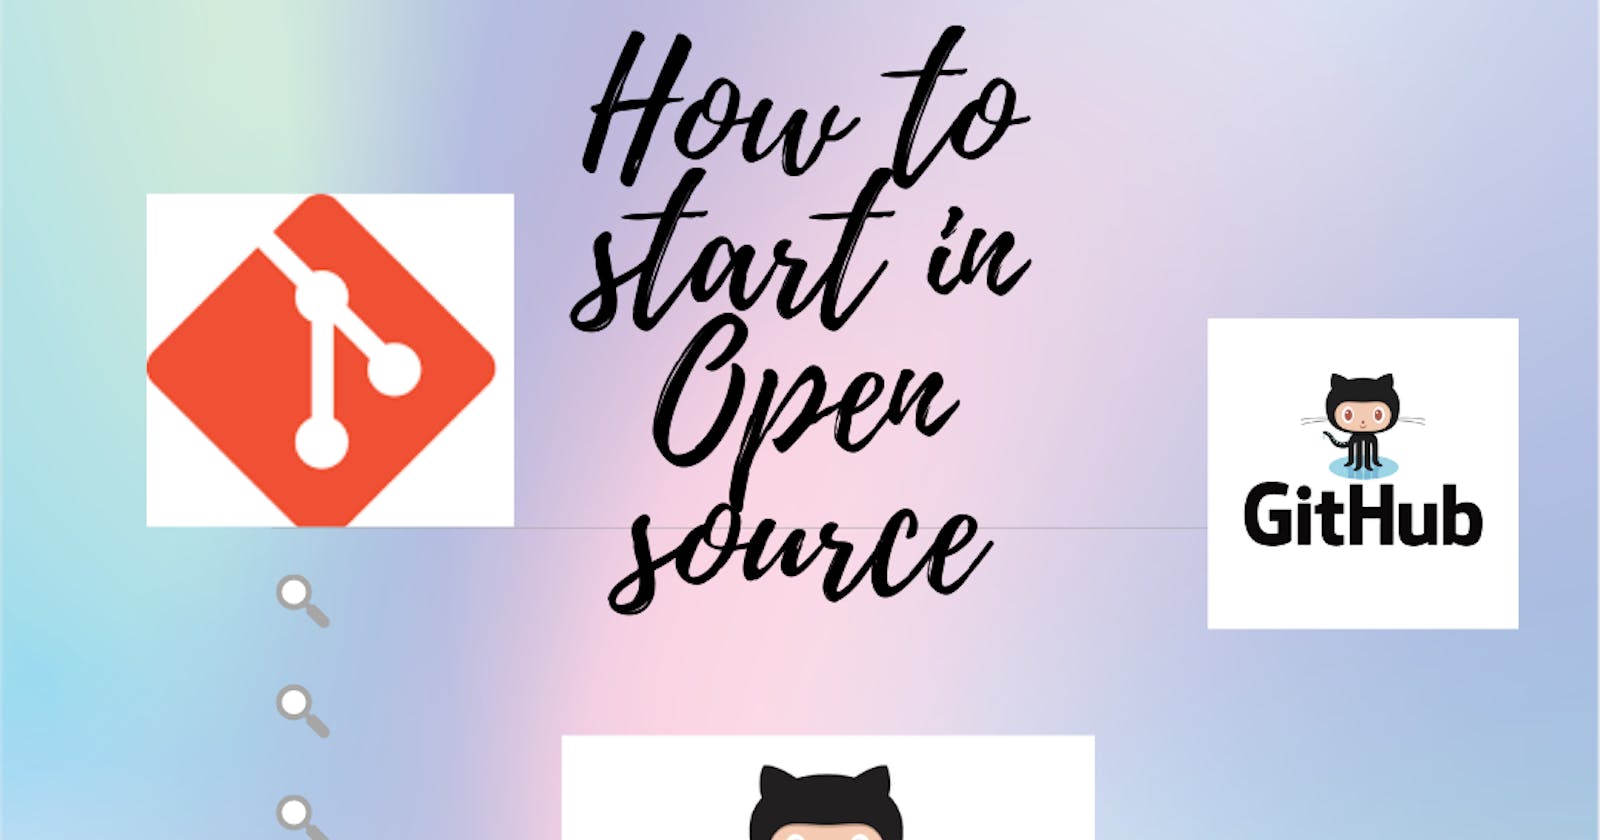 How to start with Open Source